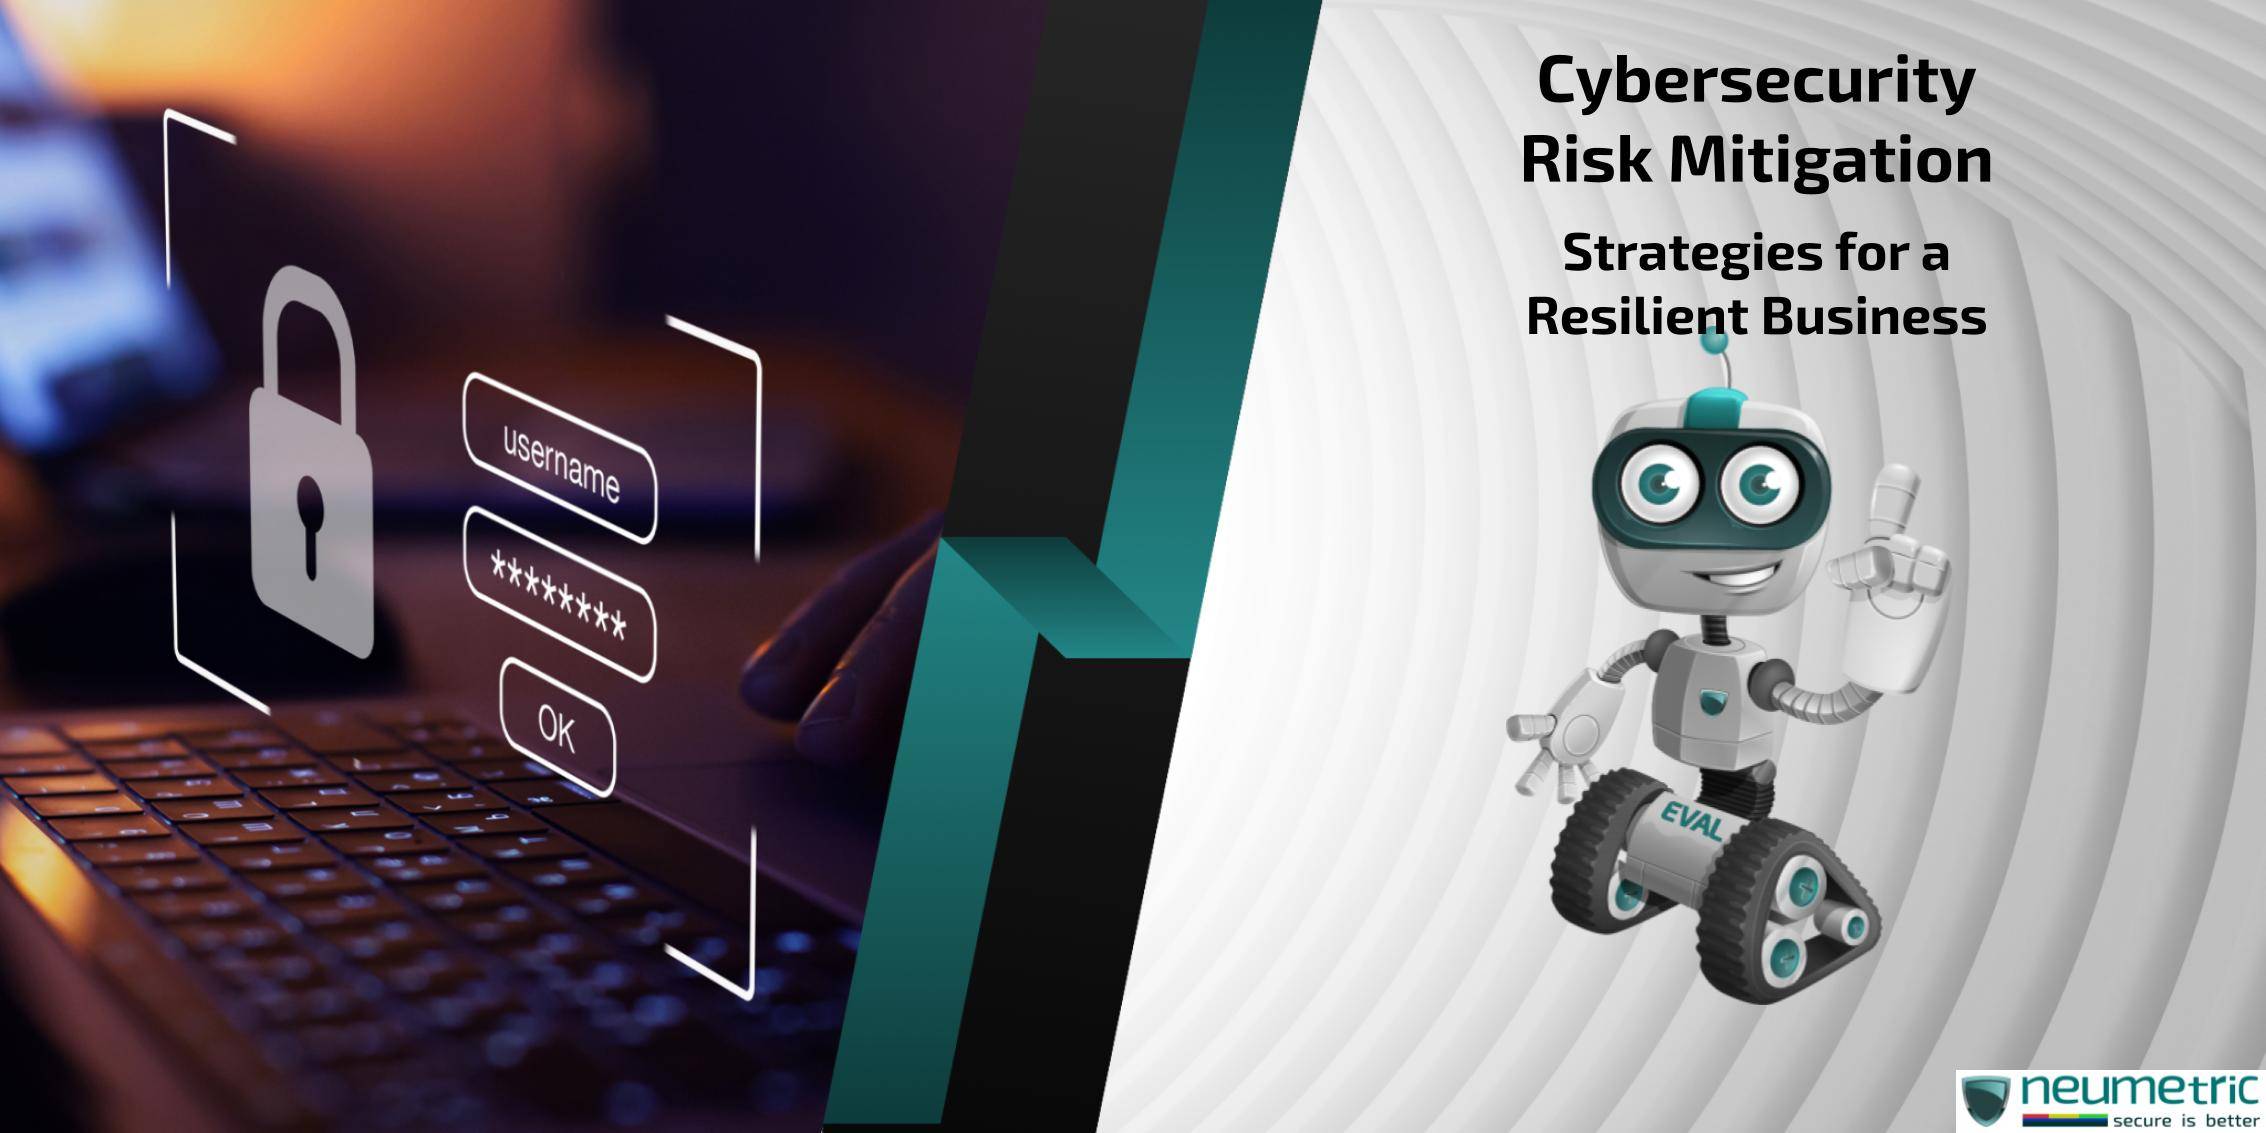 Cybersecurity Risk Mitigation: Strategies for a Resilient Business